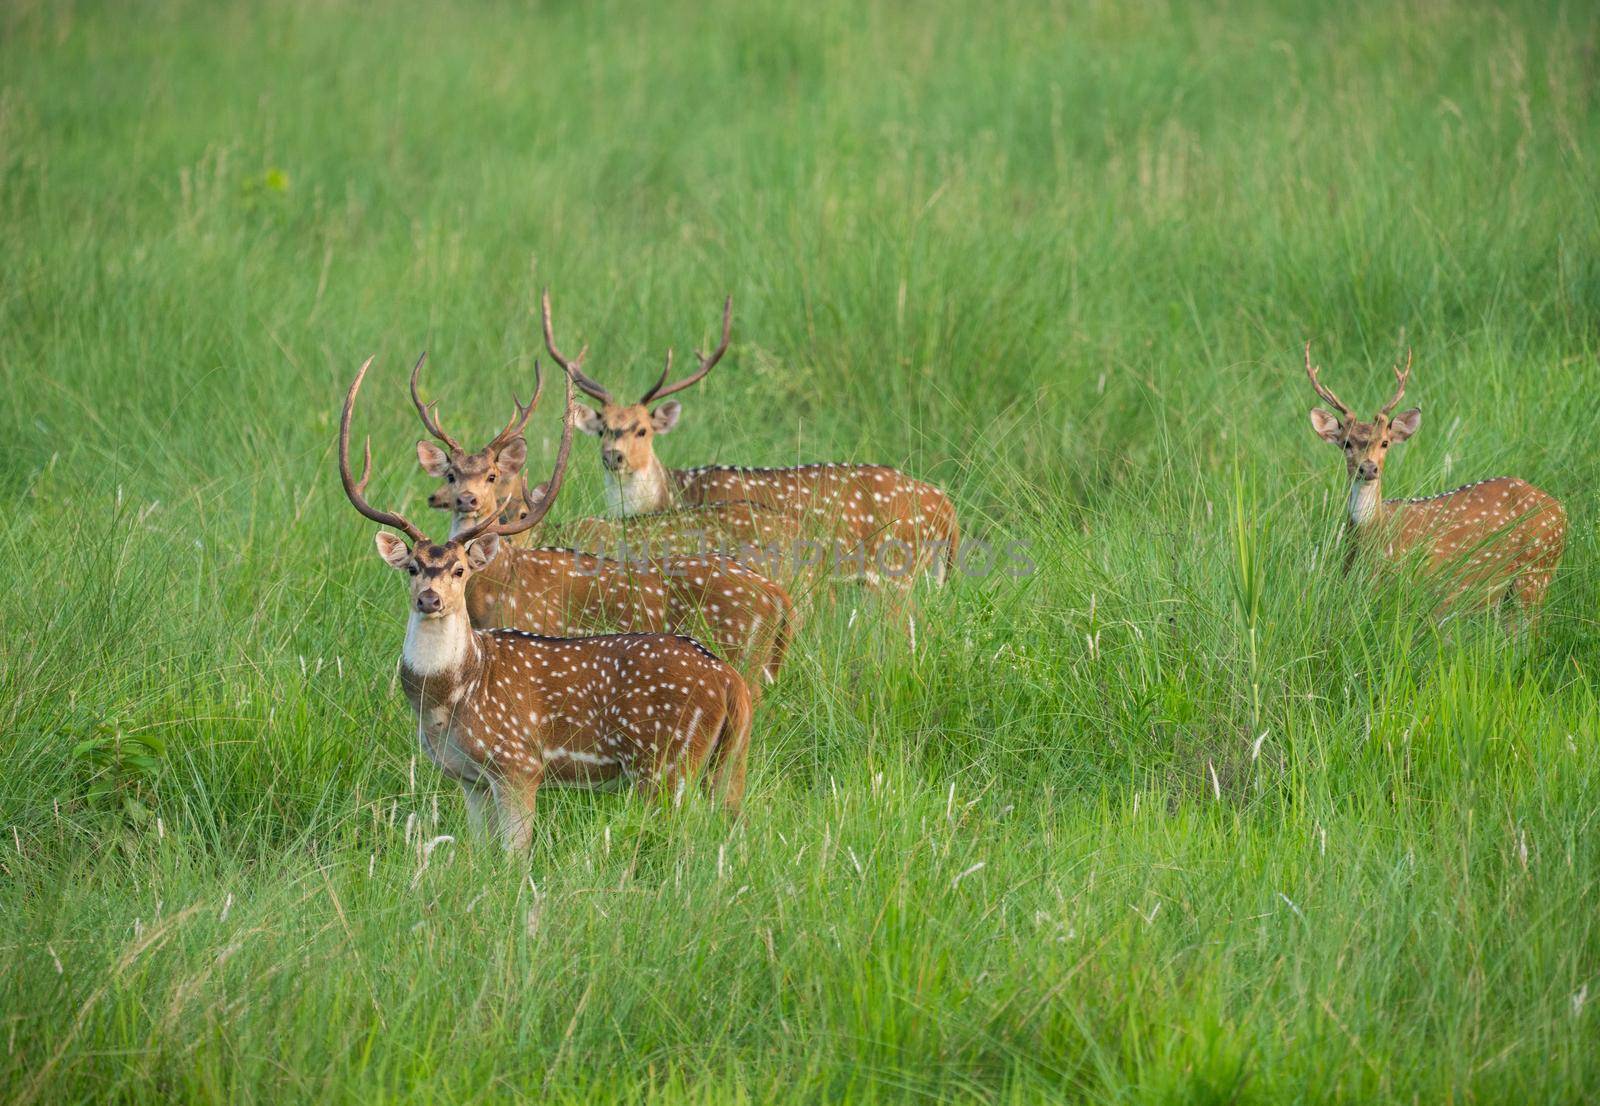 Sika or spotted deers herd in the elephant grass. Wildlife and animal photo. Japanese deer Cervus nippon